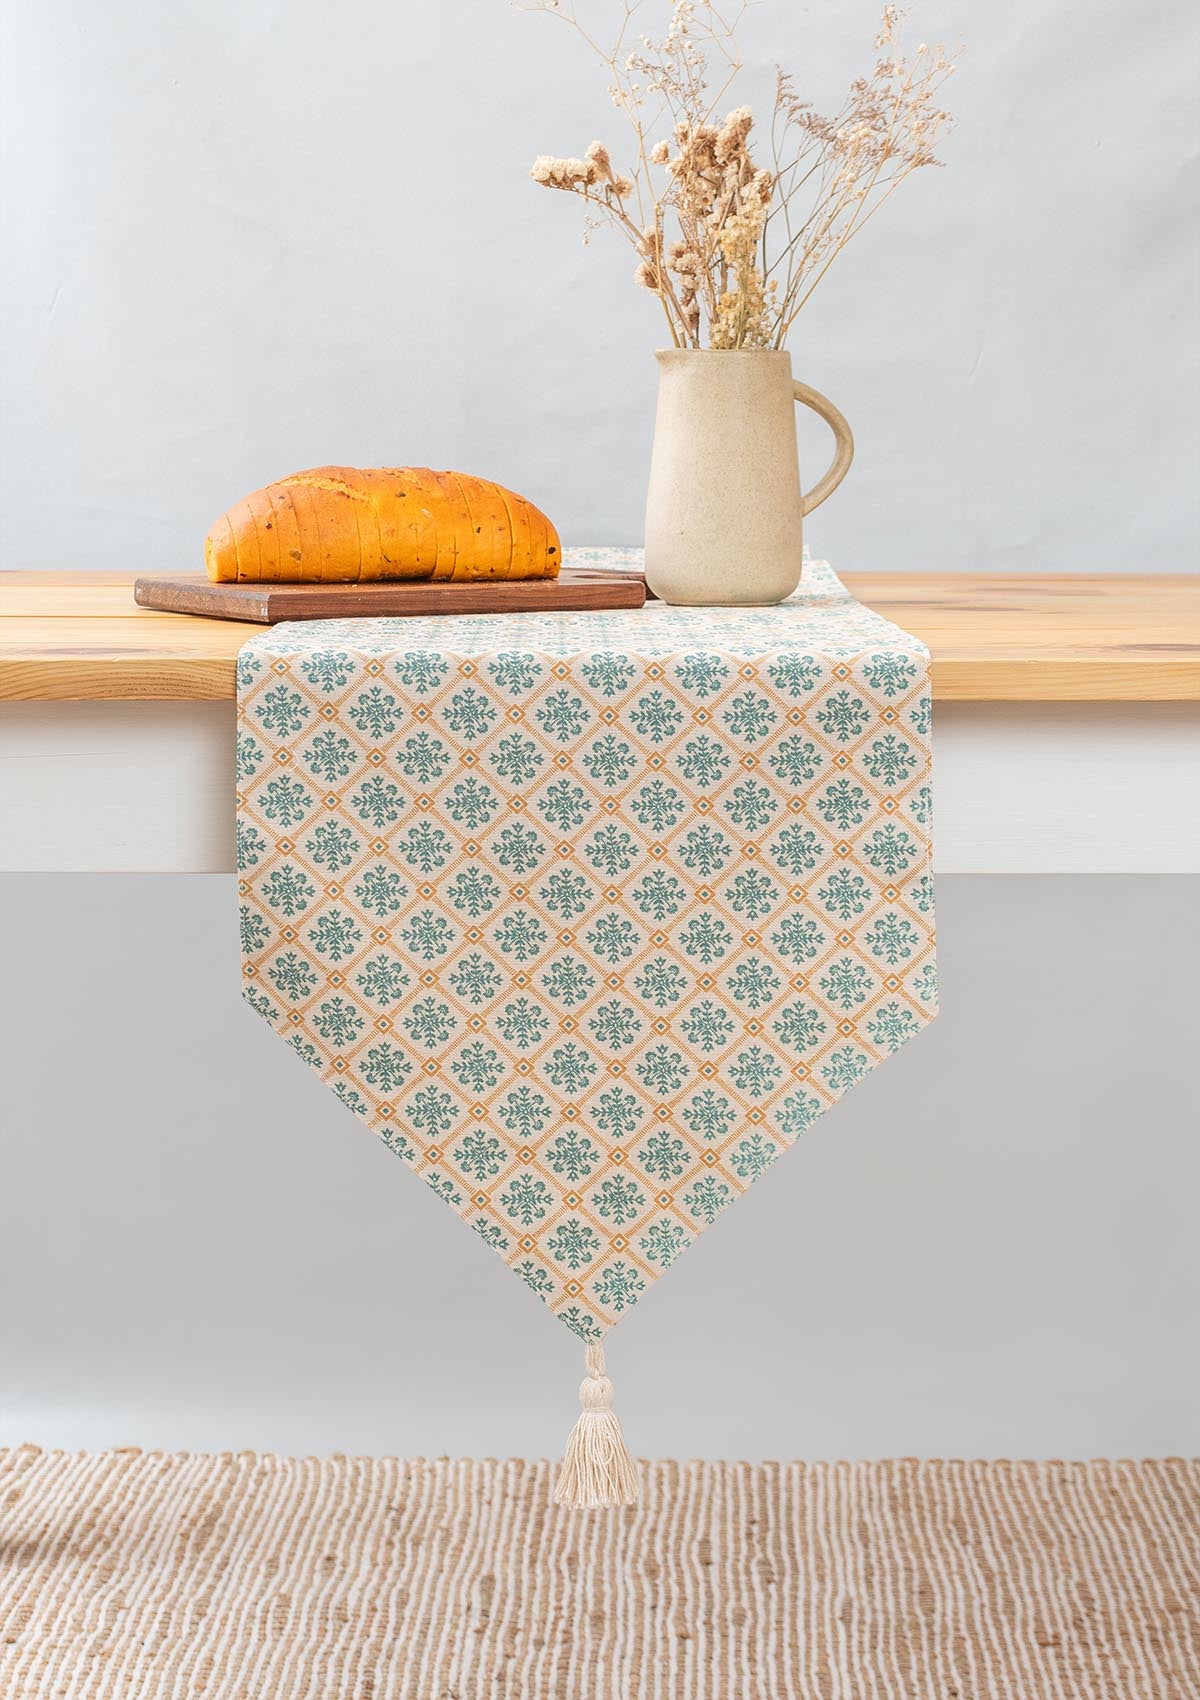 Yura 100% cotton geomtric table runner for 4 seater or 6 seater dining - Aqua blue - With tassels